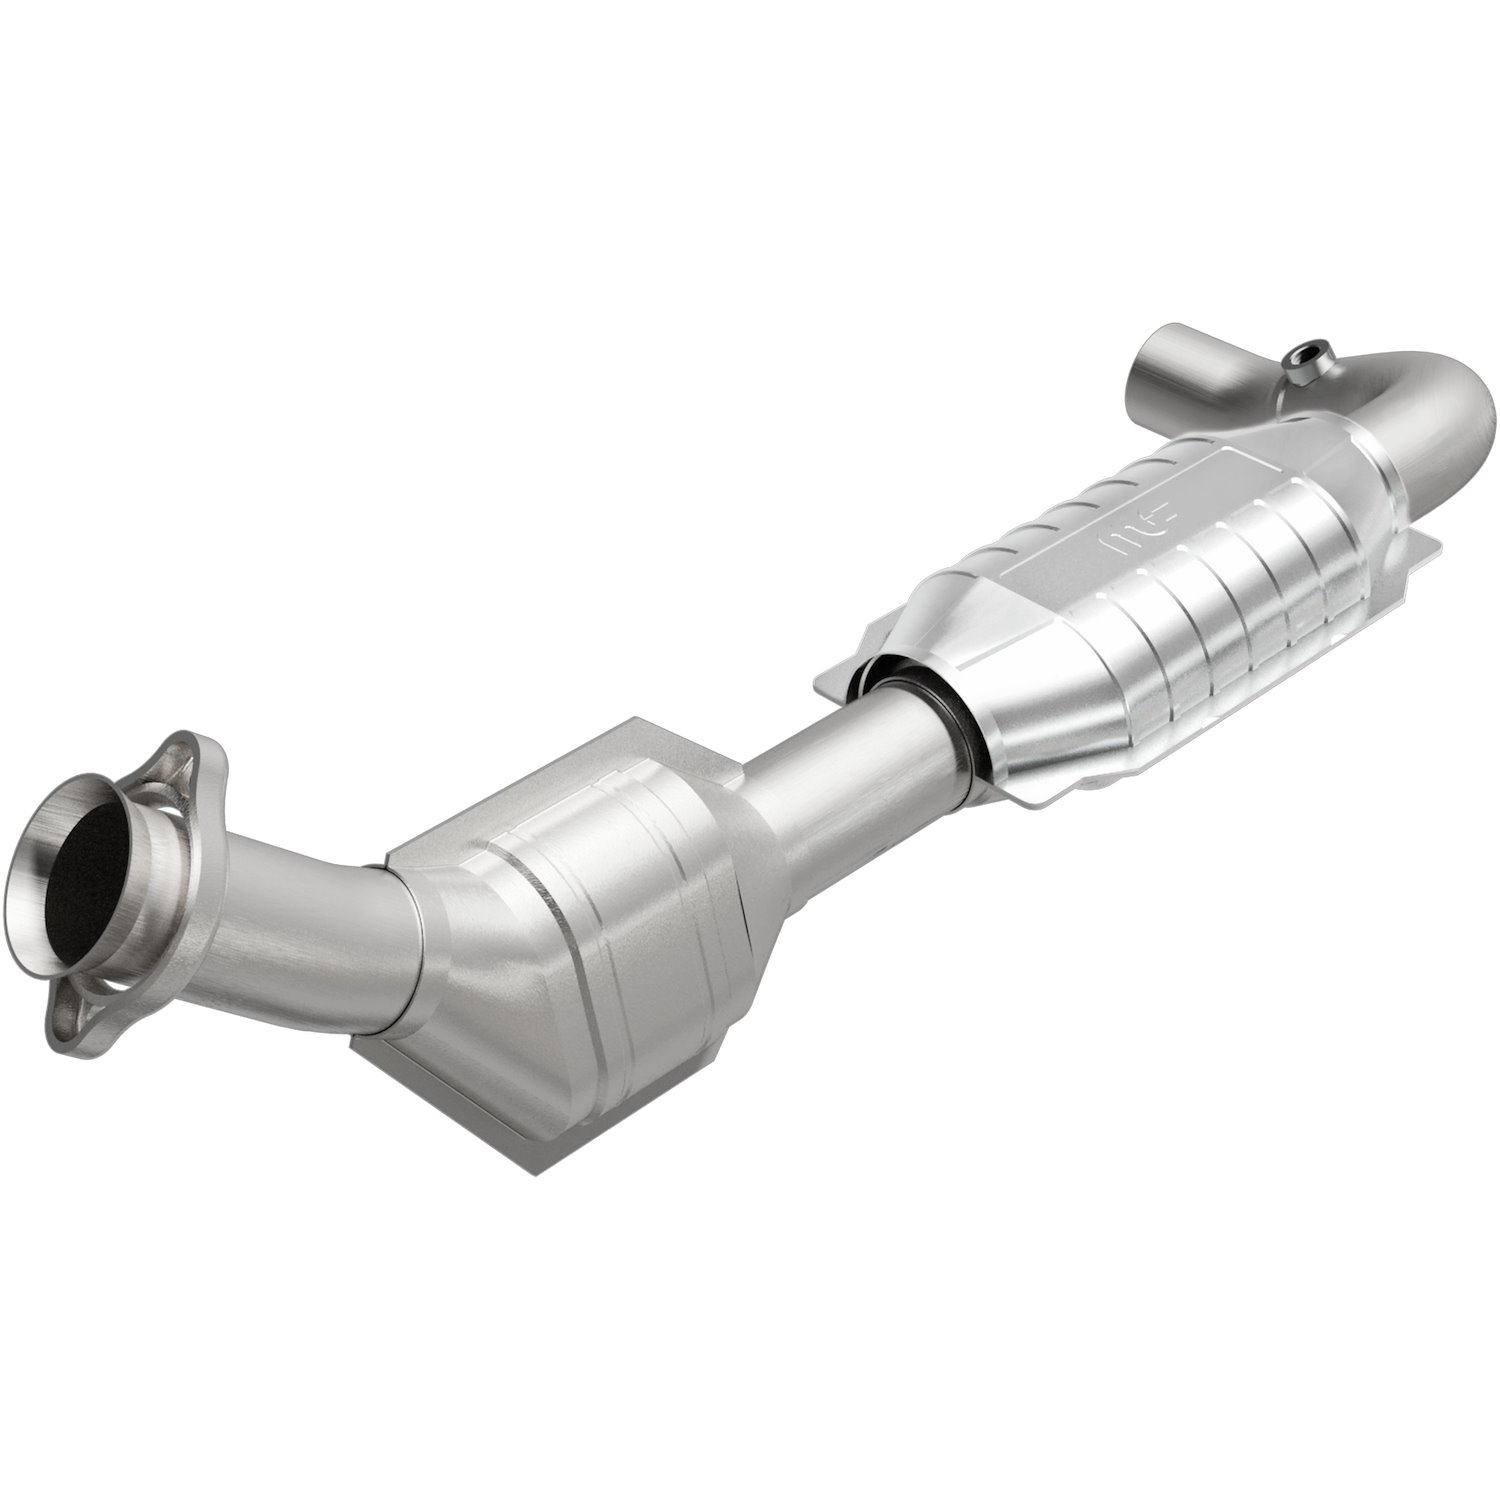 California Grade CARB Compliant Direct-Fit Catalytic Converter 447179